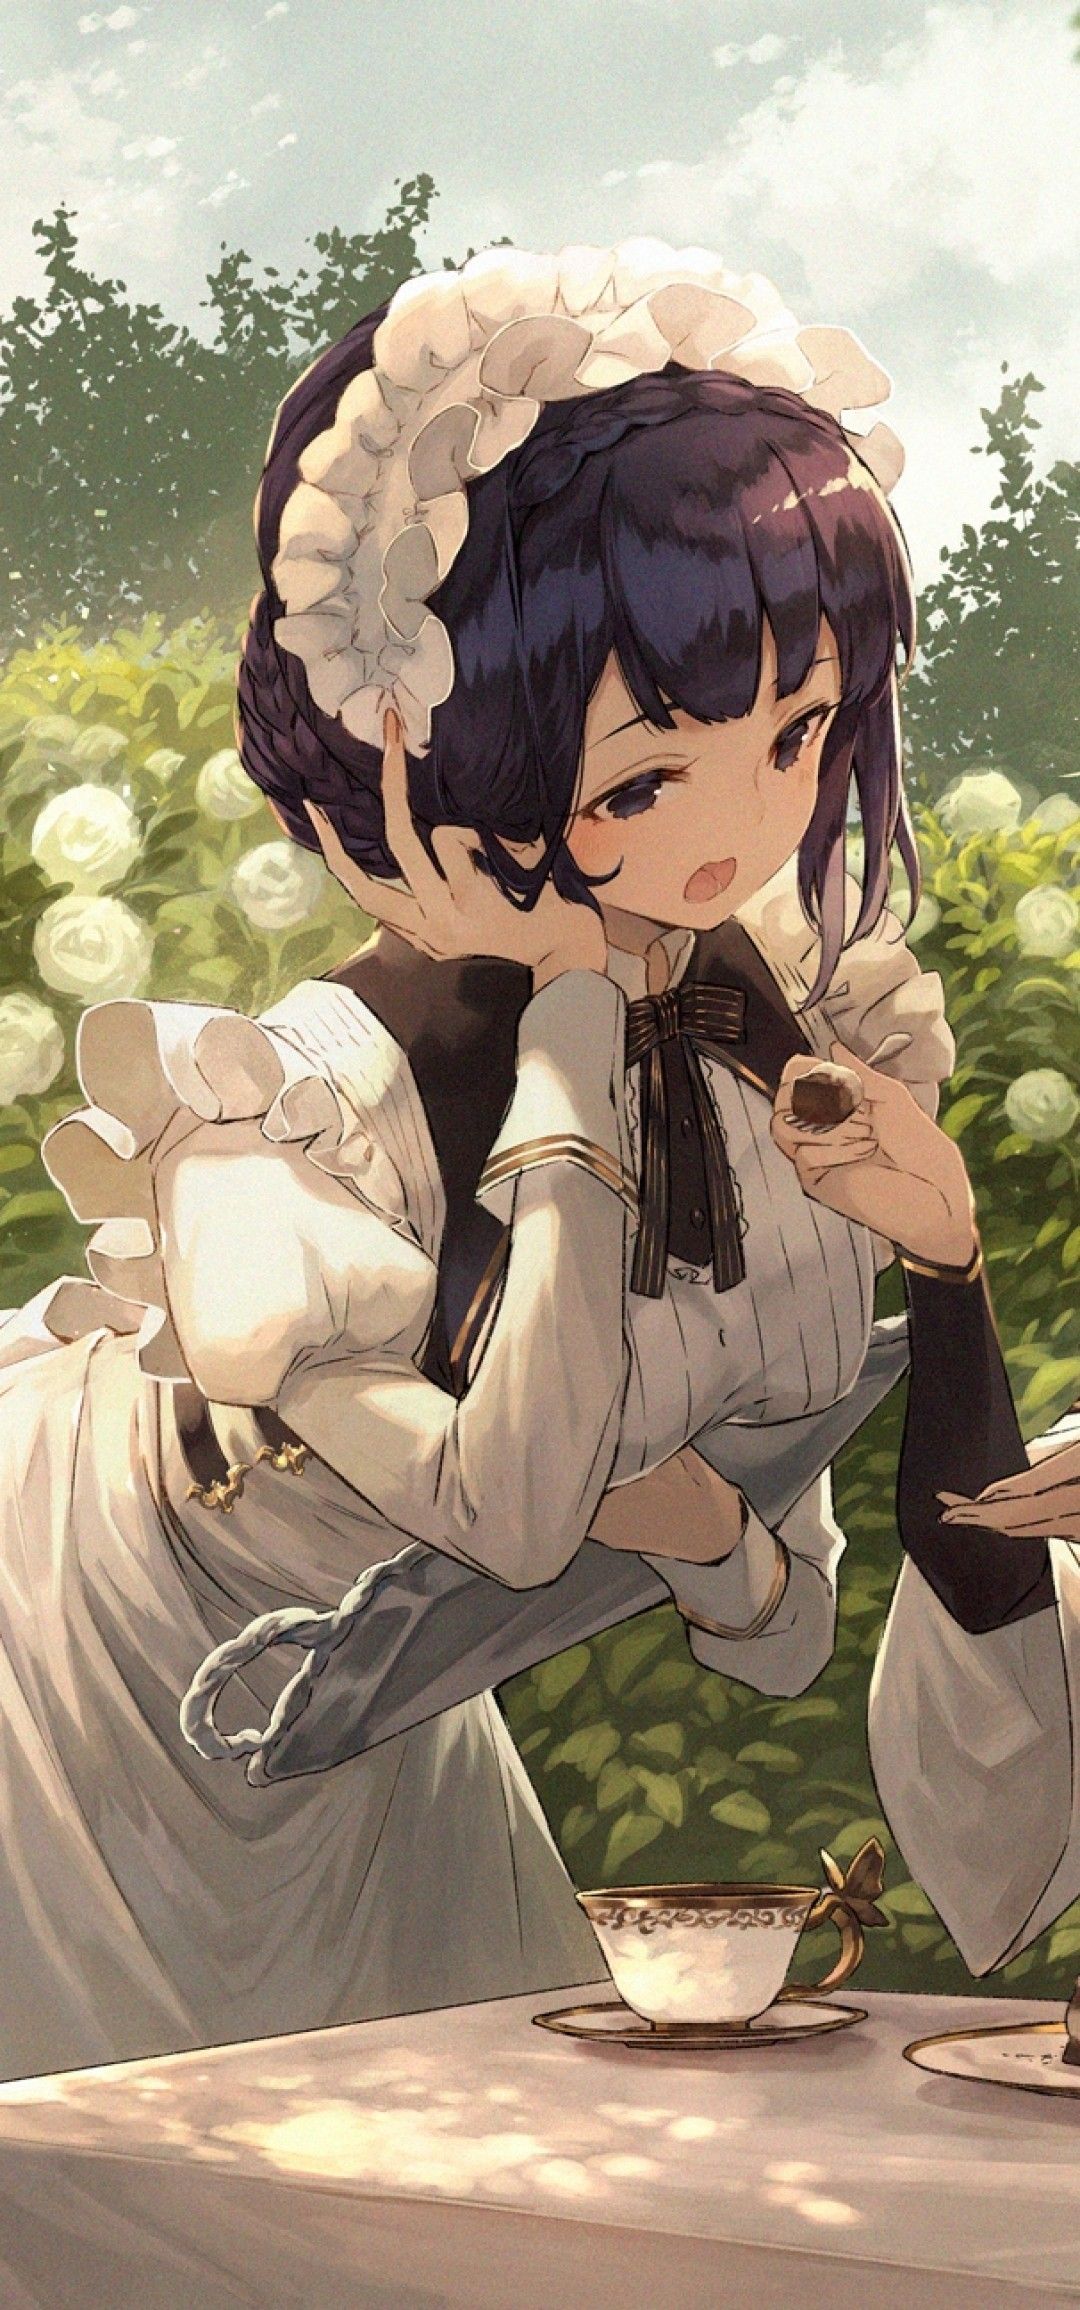 Download 1080x2310 Anime Boy And Maid .wallpapermaiden.com